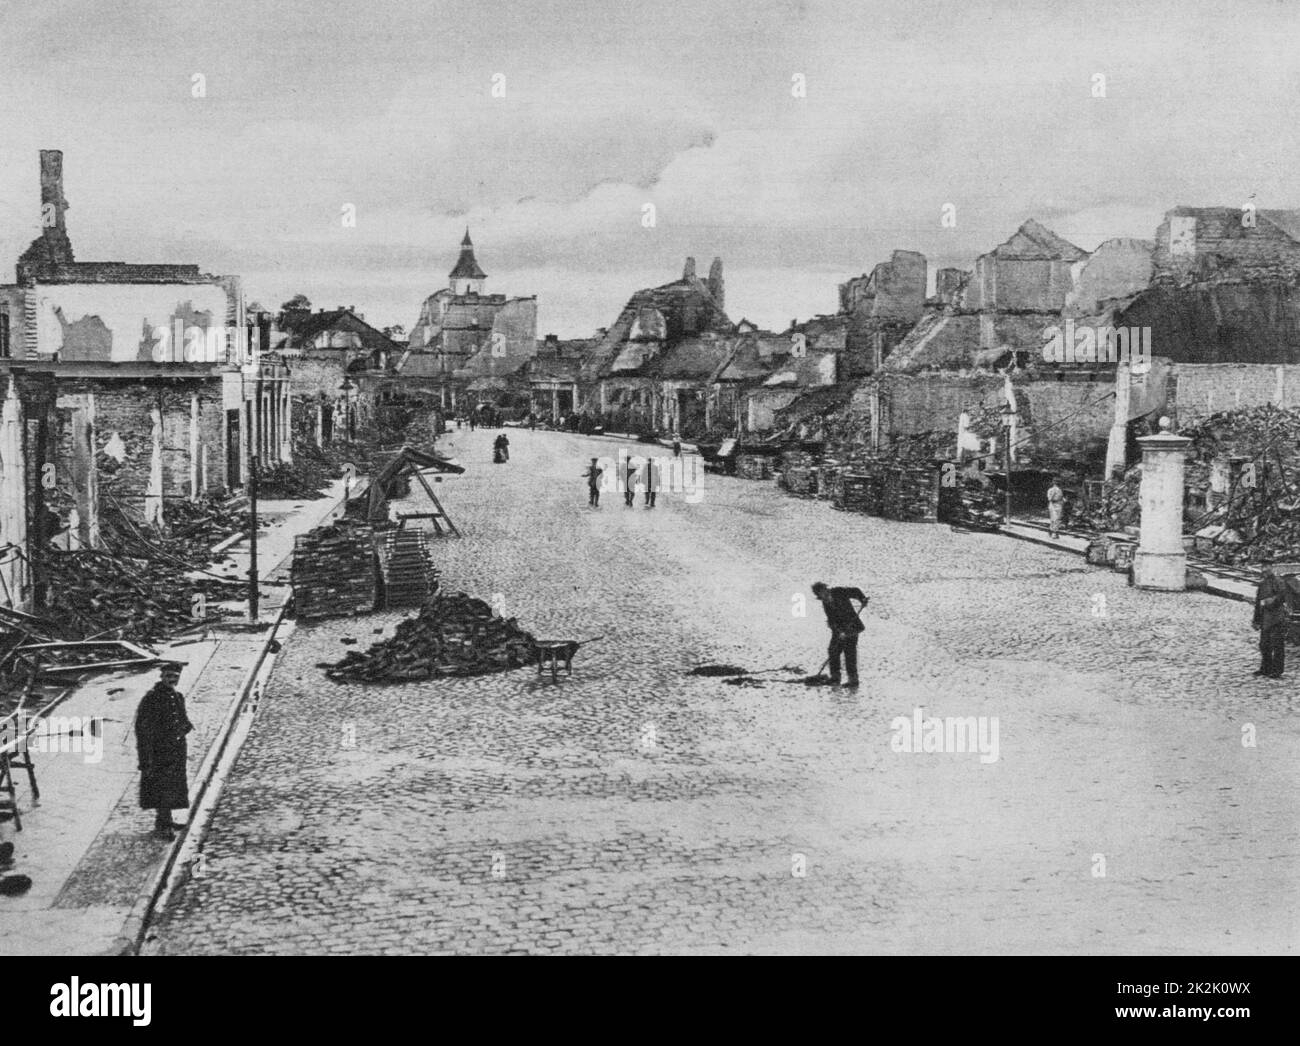 World War I 1914-1918: Street in the east Prussian town of Ortelsbourg destroyed by Russian bombardment, August 1915. Ruins, Debris, Rubble Stock Photo